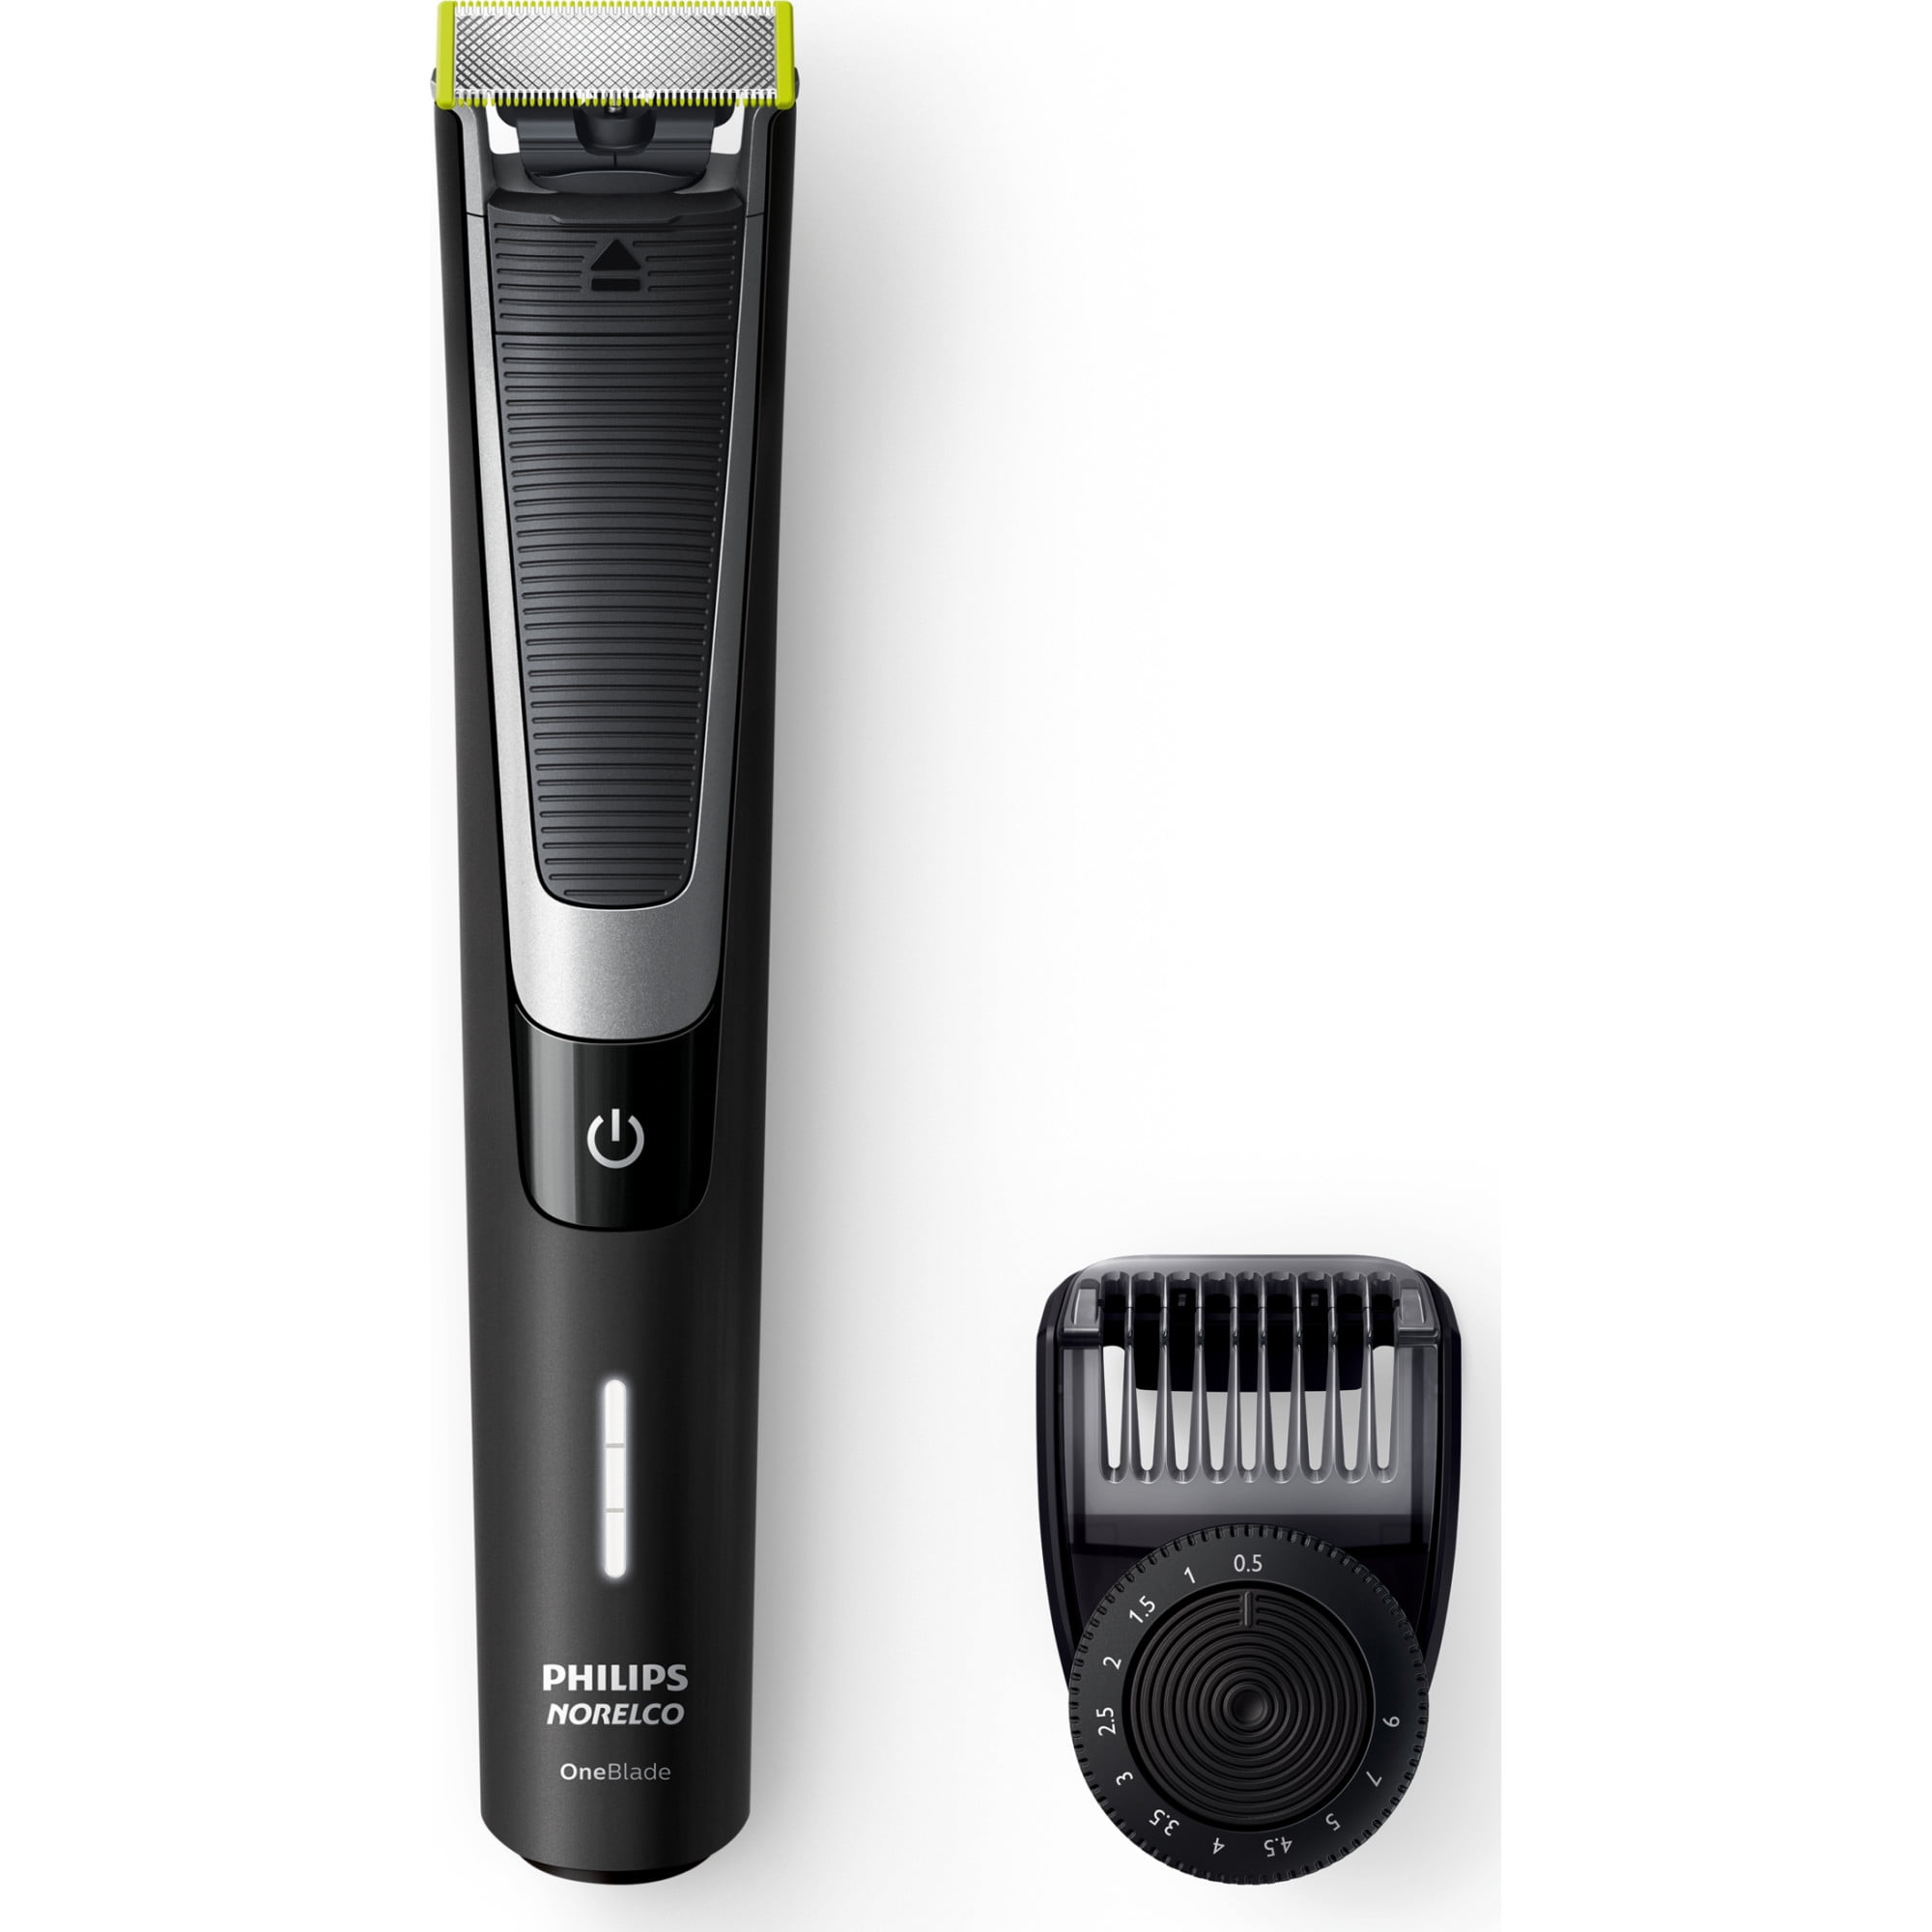 Philips Norelco Oneblade Pro Hybrid Electric Trimmer and Shaver, QP6510/70  